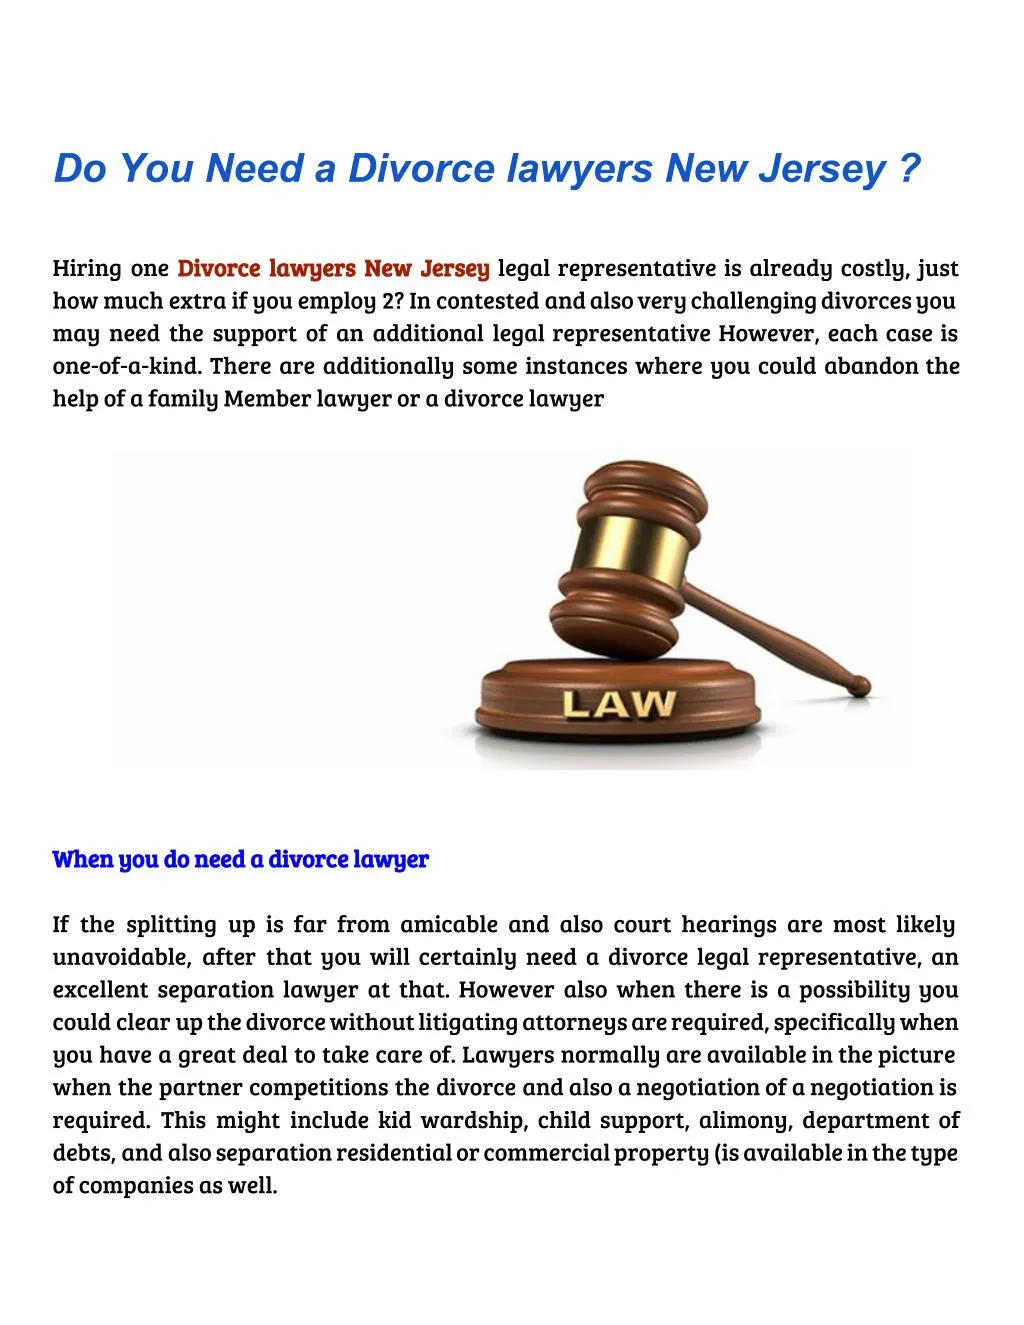 do you need a divorce lawyers new jersey hiring